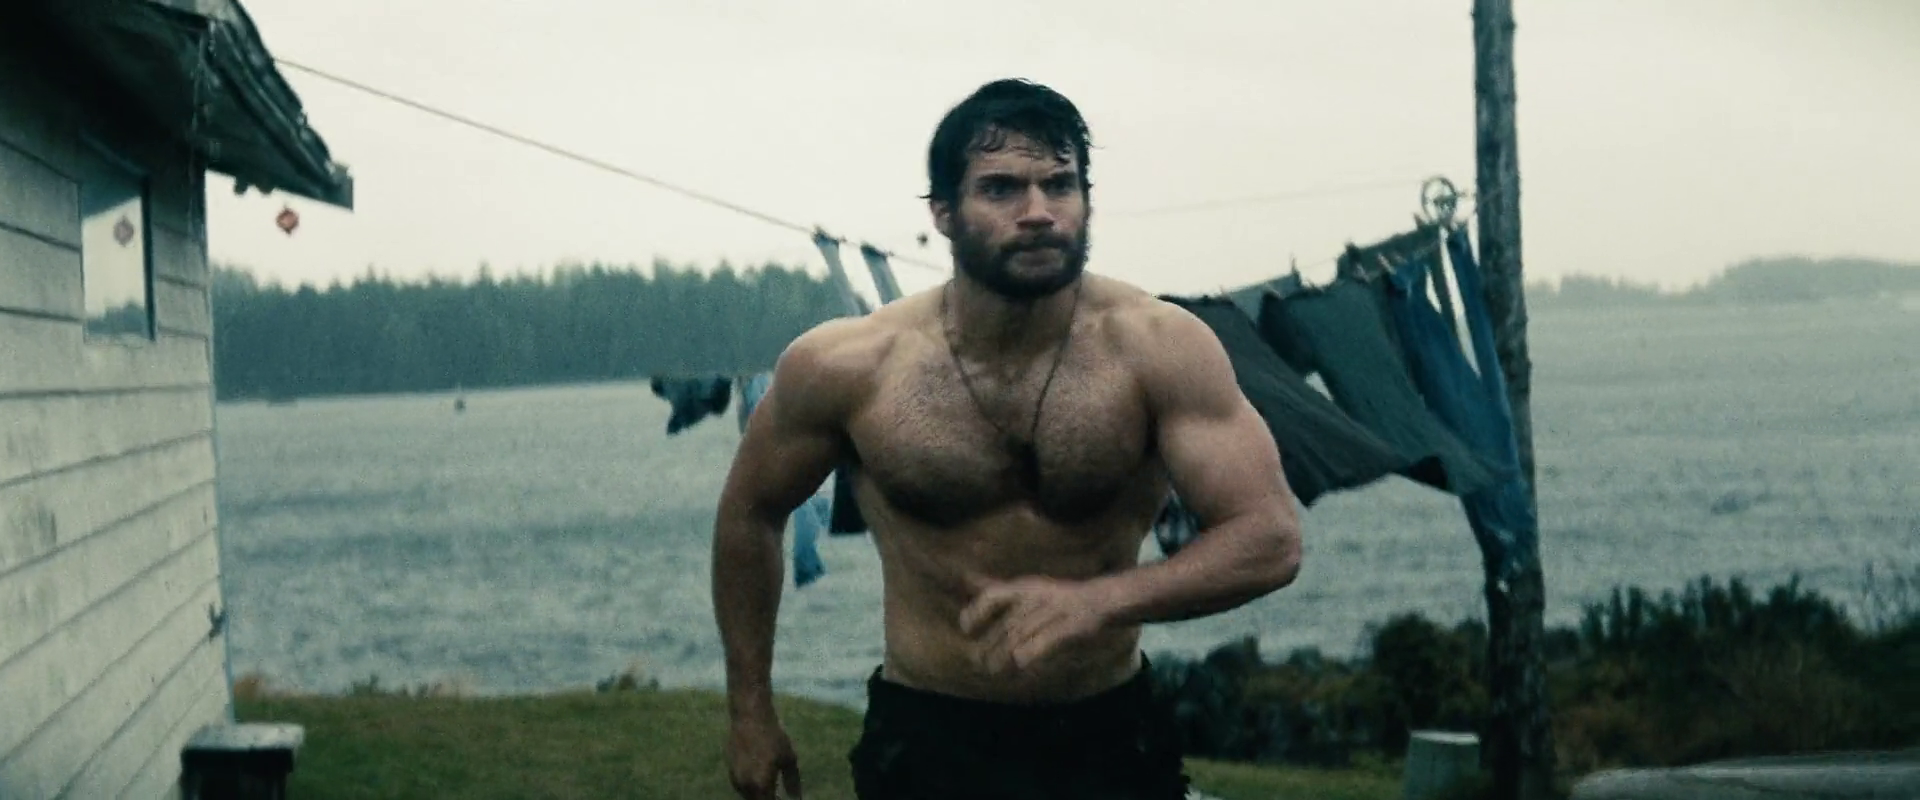 Henry Cavill Was Told He Was 'A Little Chubby' to Play James Bond ...